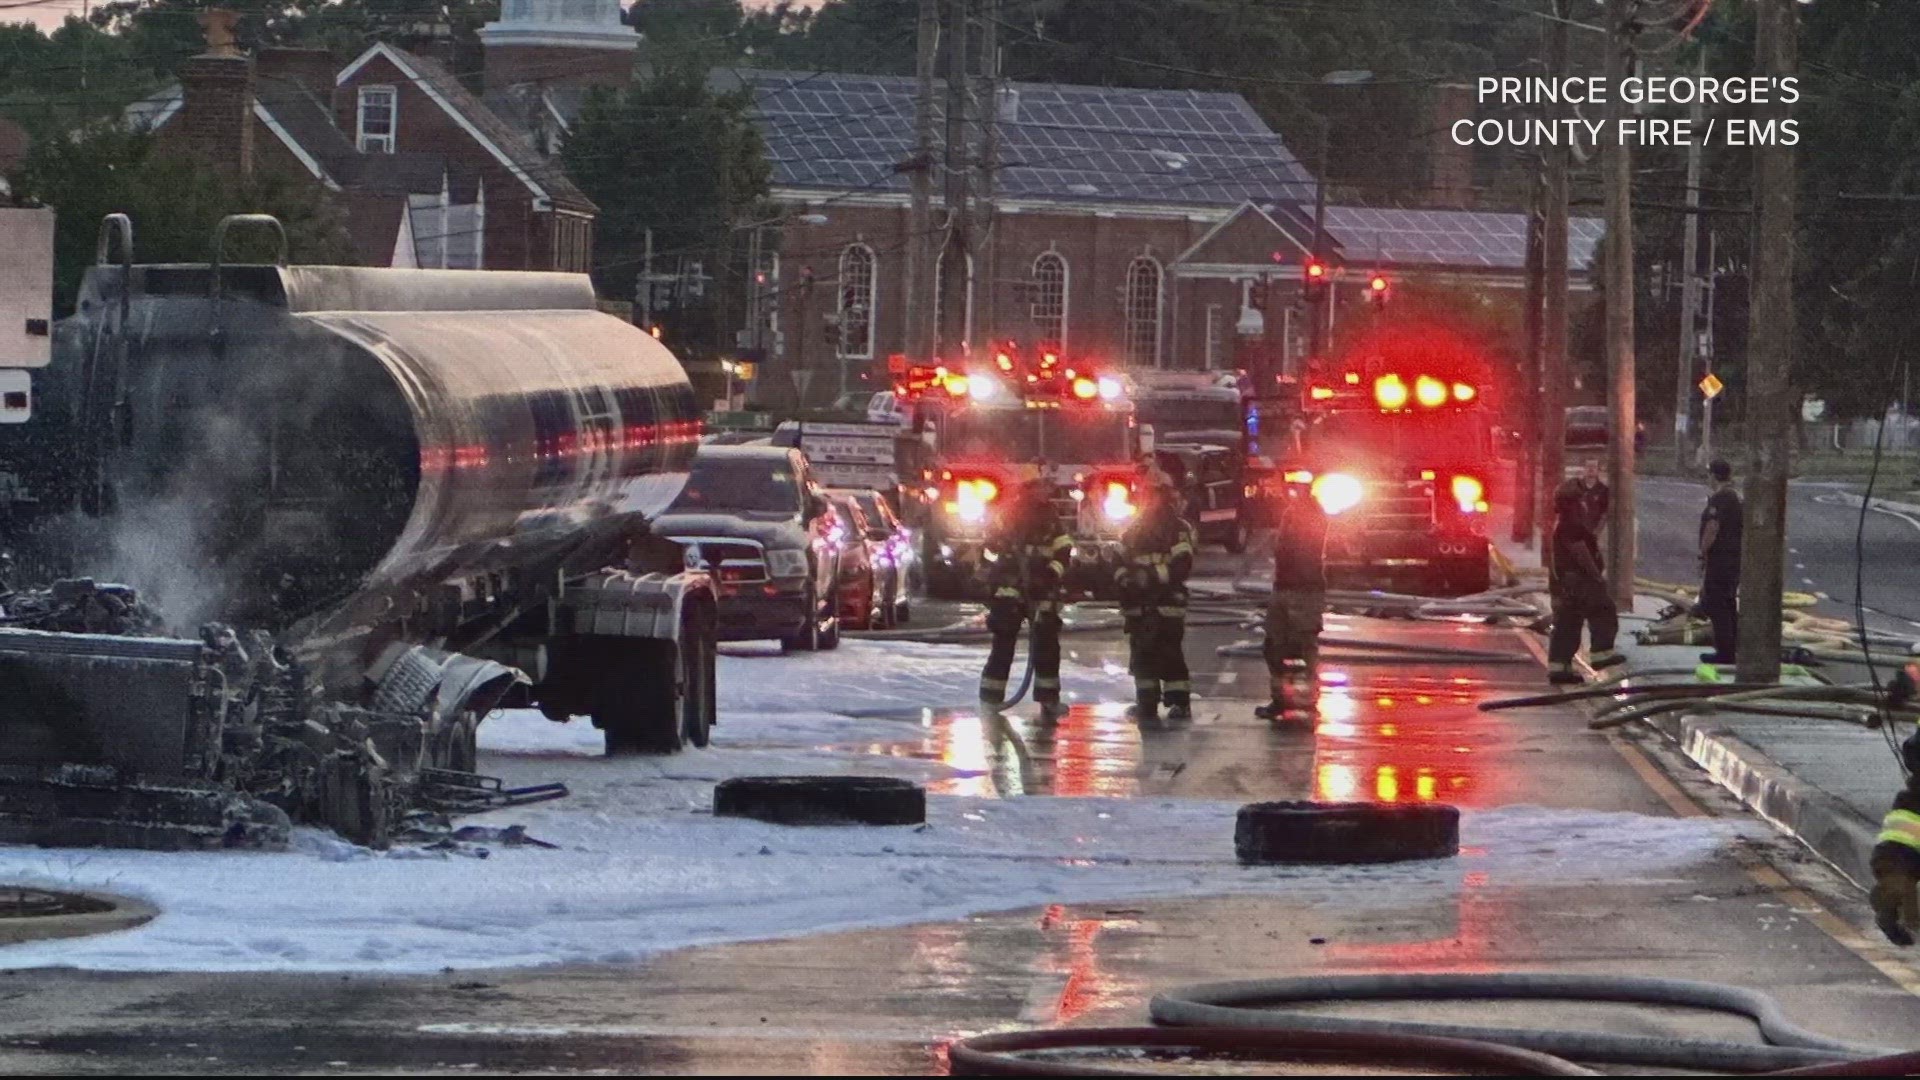 The cab of a fuel tanker was destroyed by fire and explosion Tuesday night in Hyattsville, Maryland. No injuries were reported, officials said.